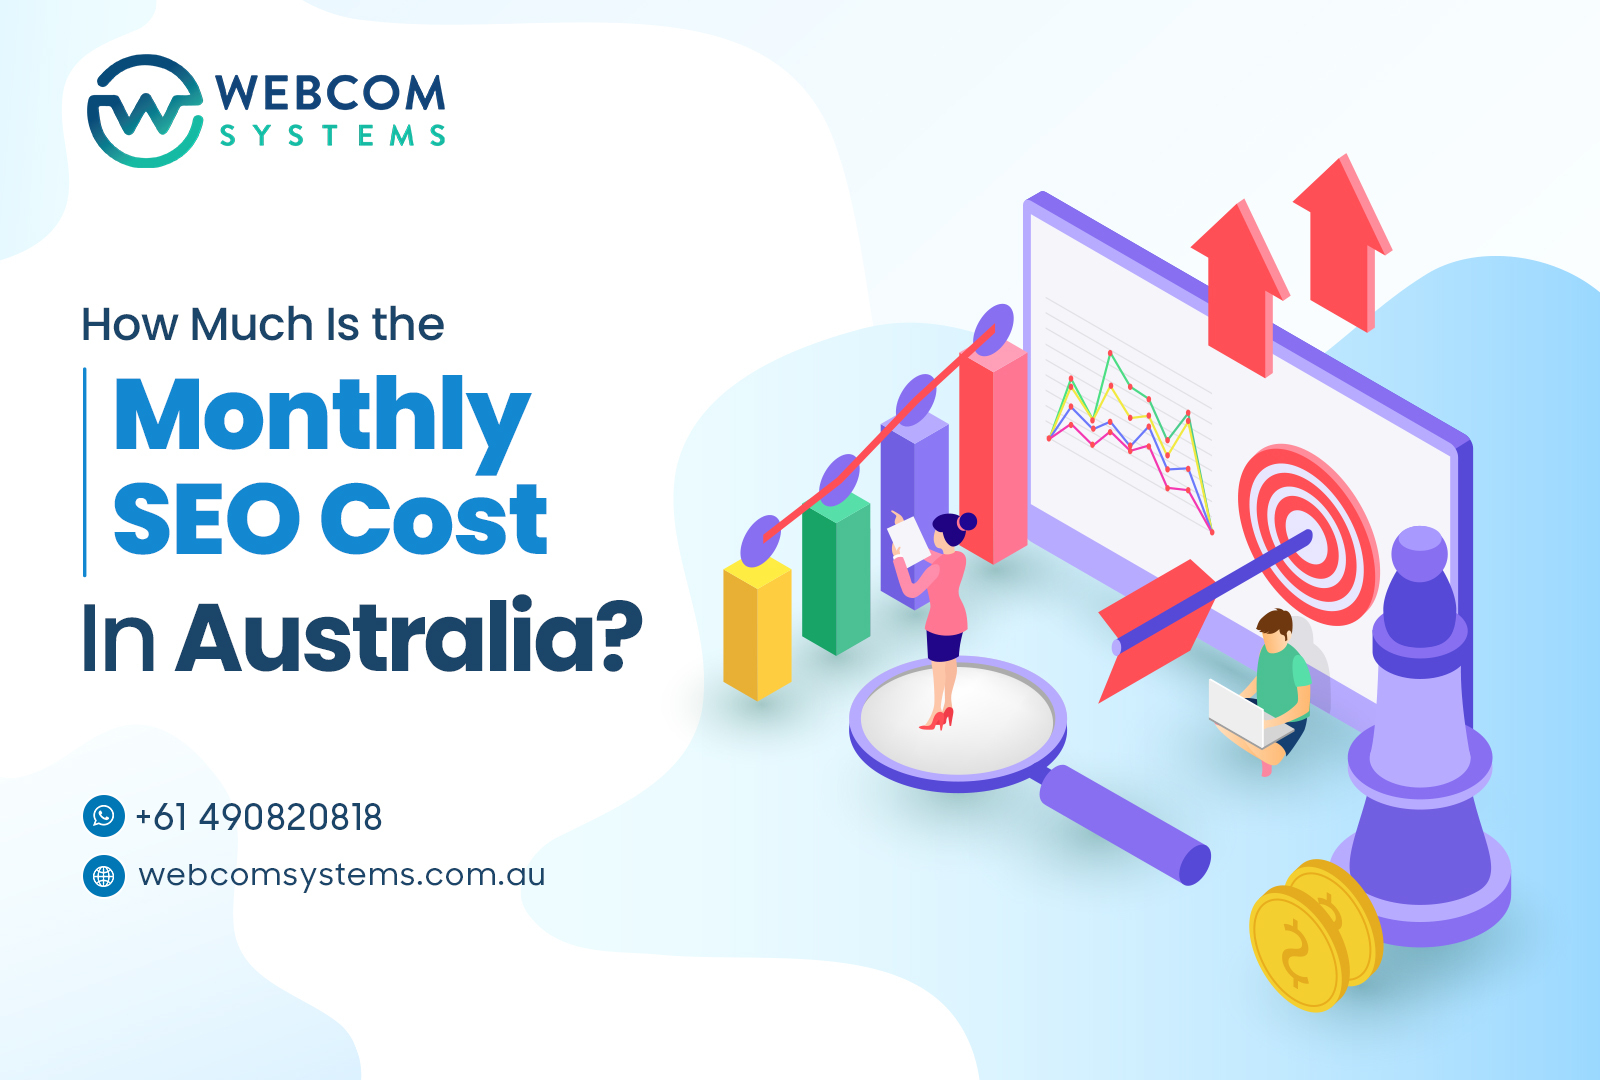 How Much is the Monthly SEO Cost In Australia?